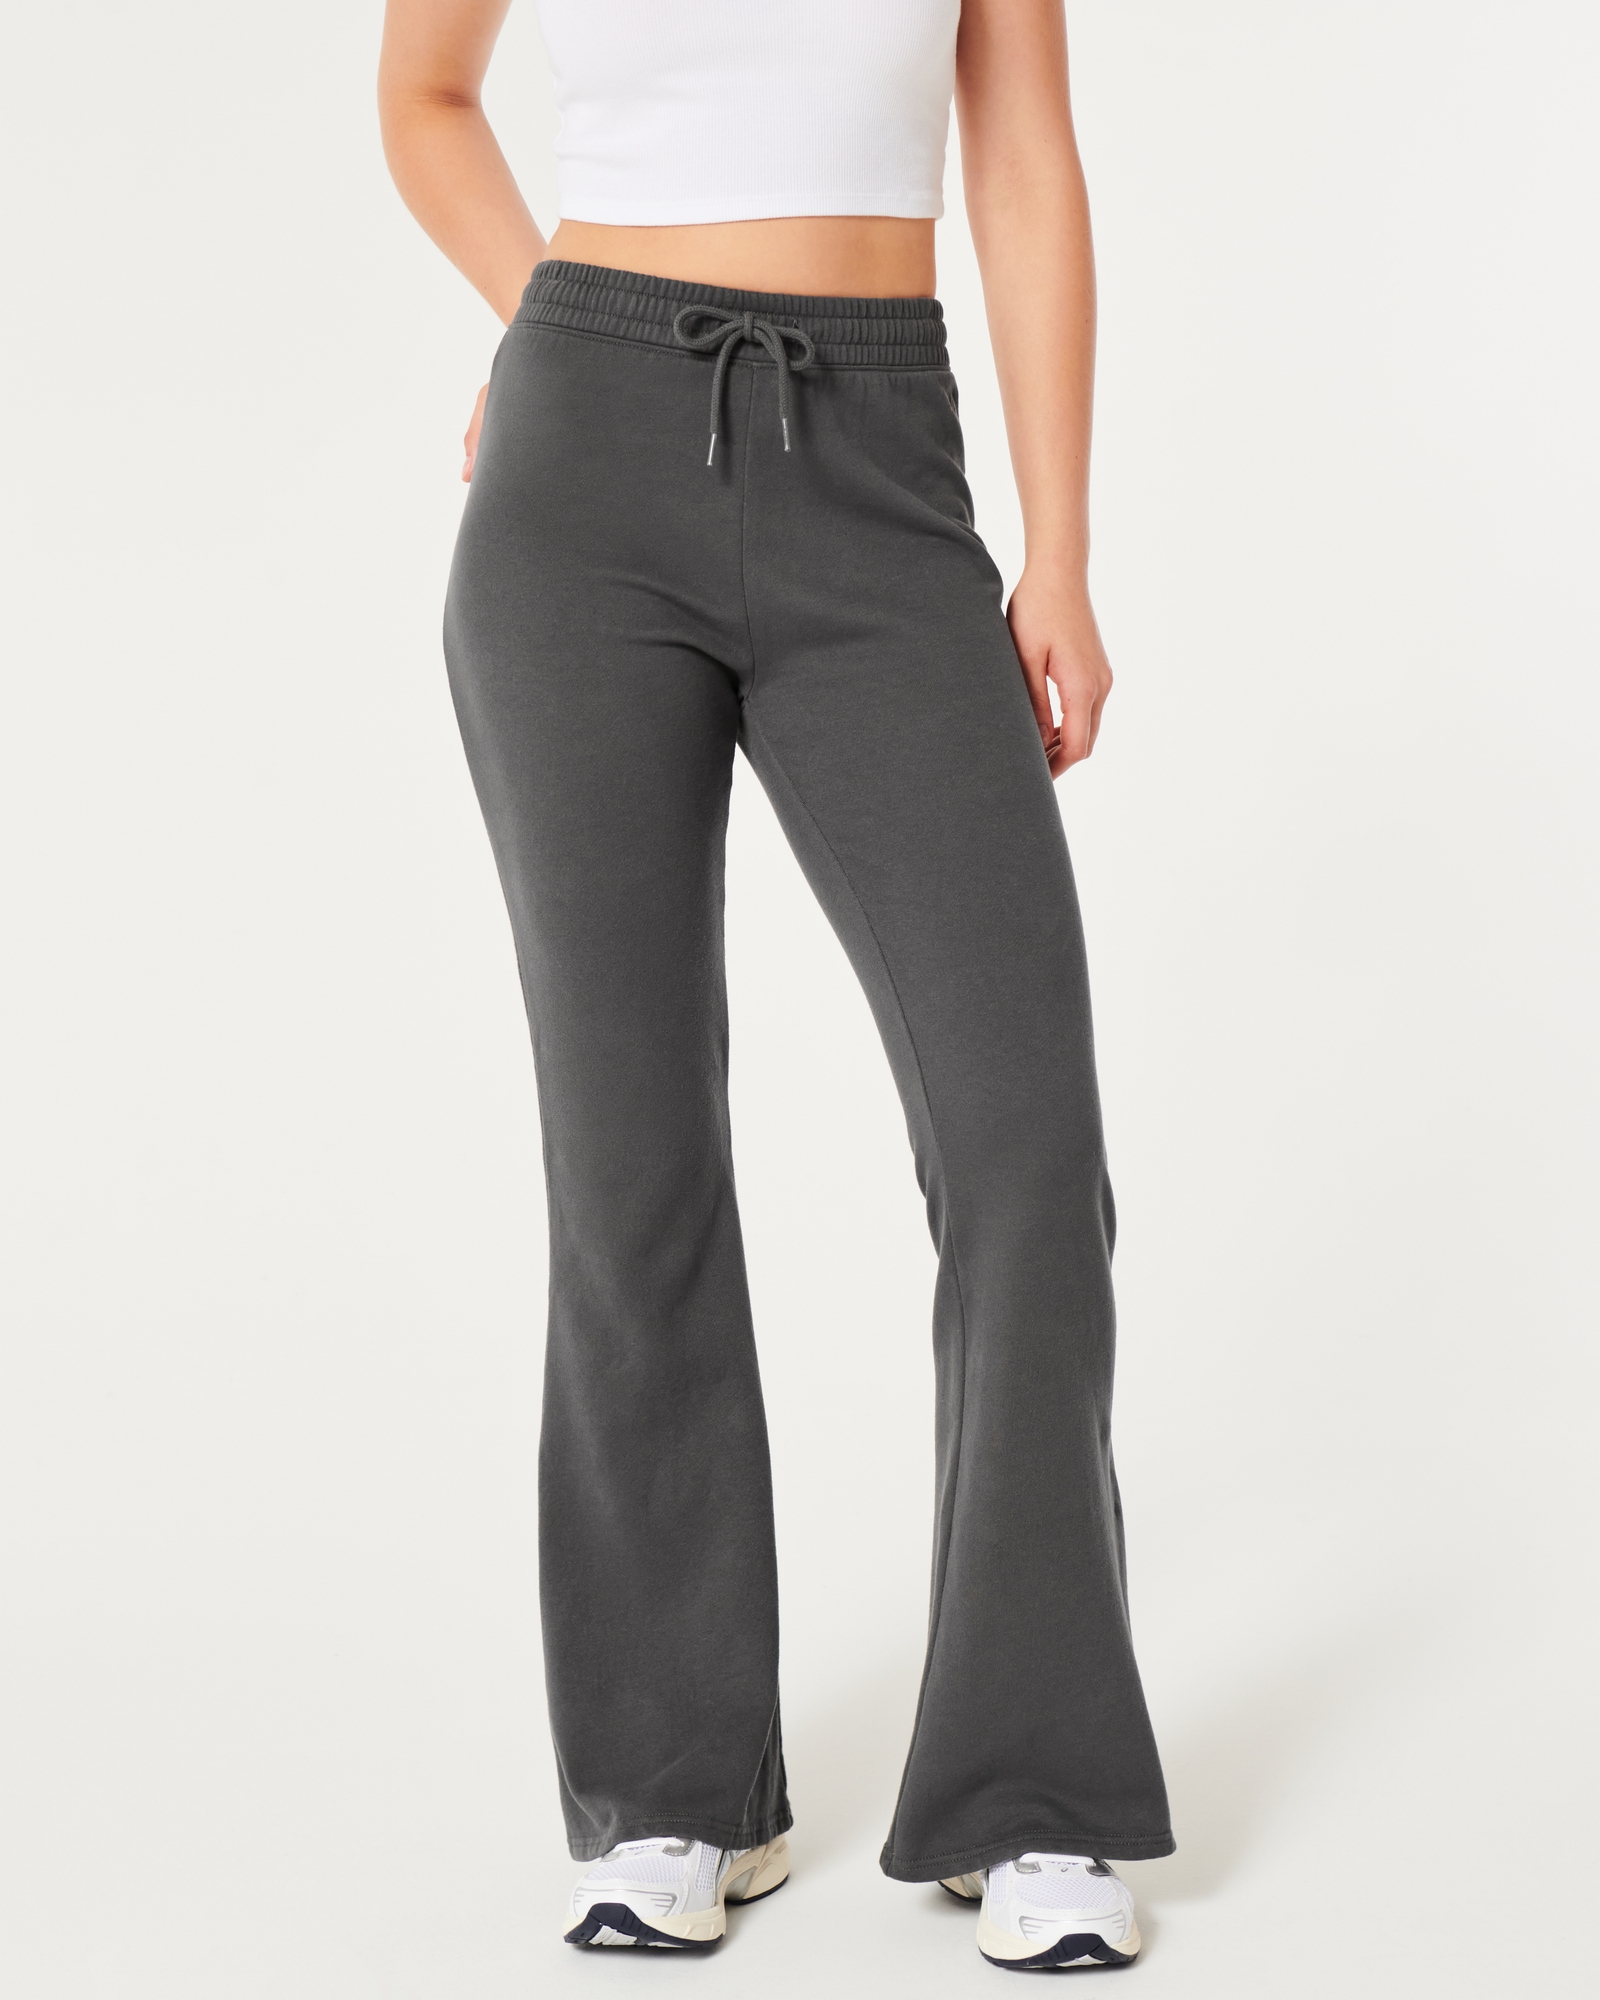 Hollister Sweatpants for women online - Buy now at